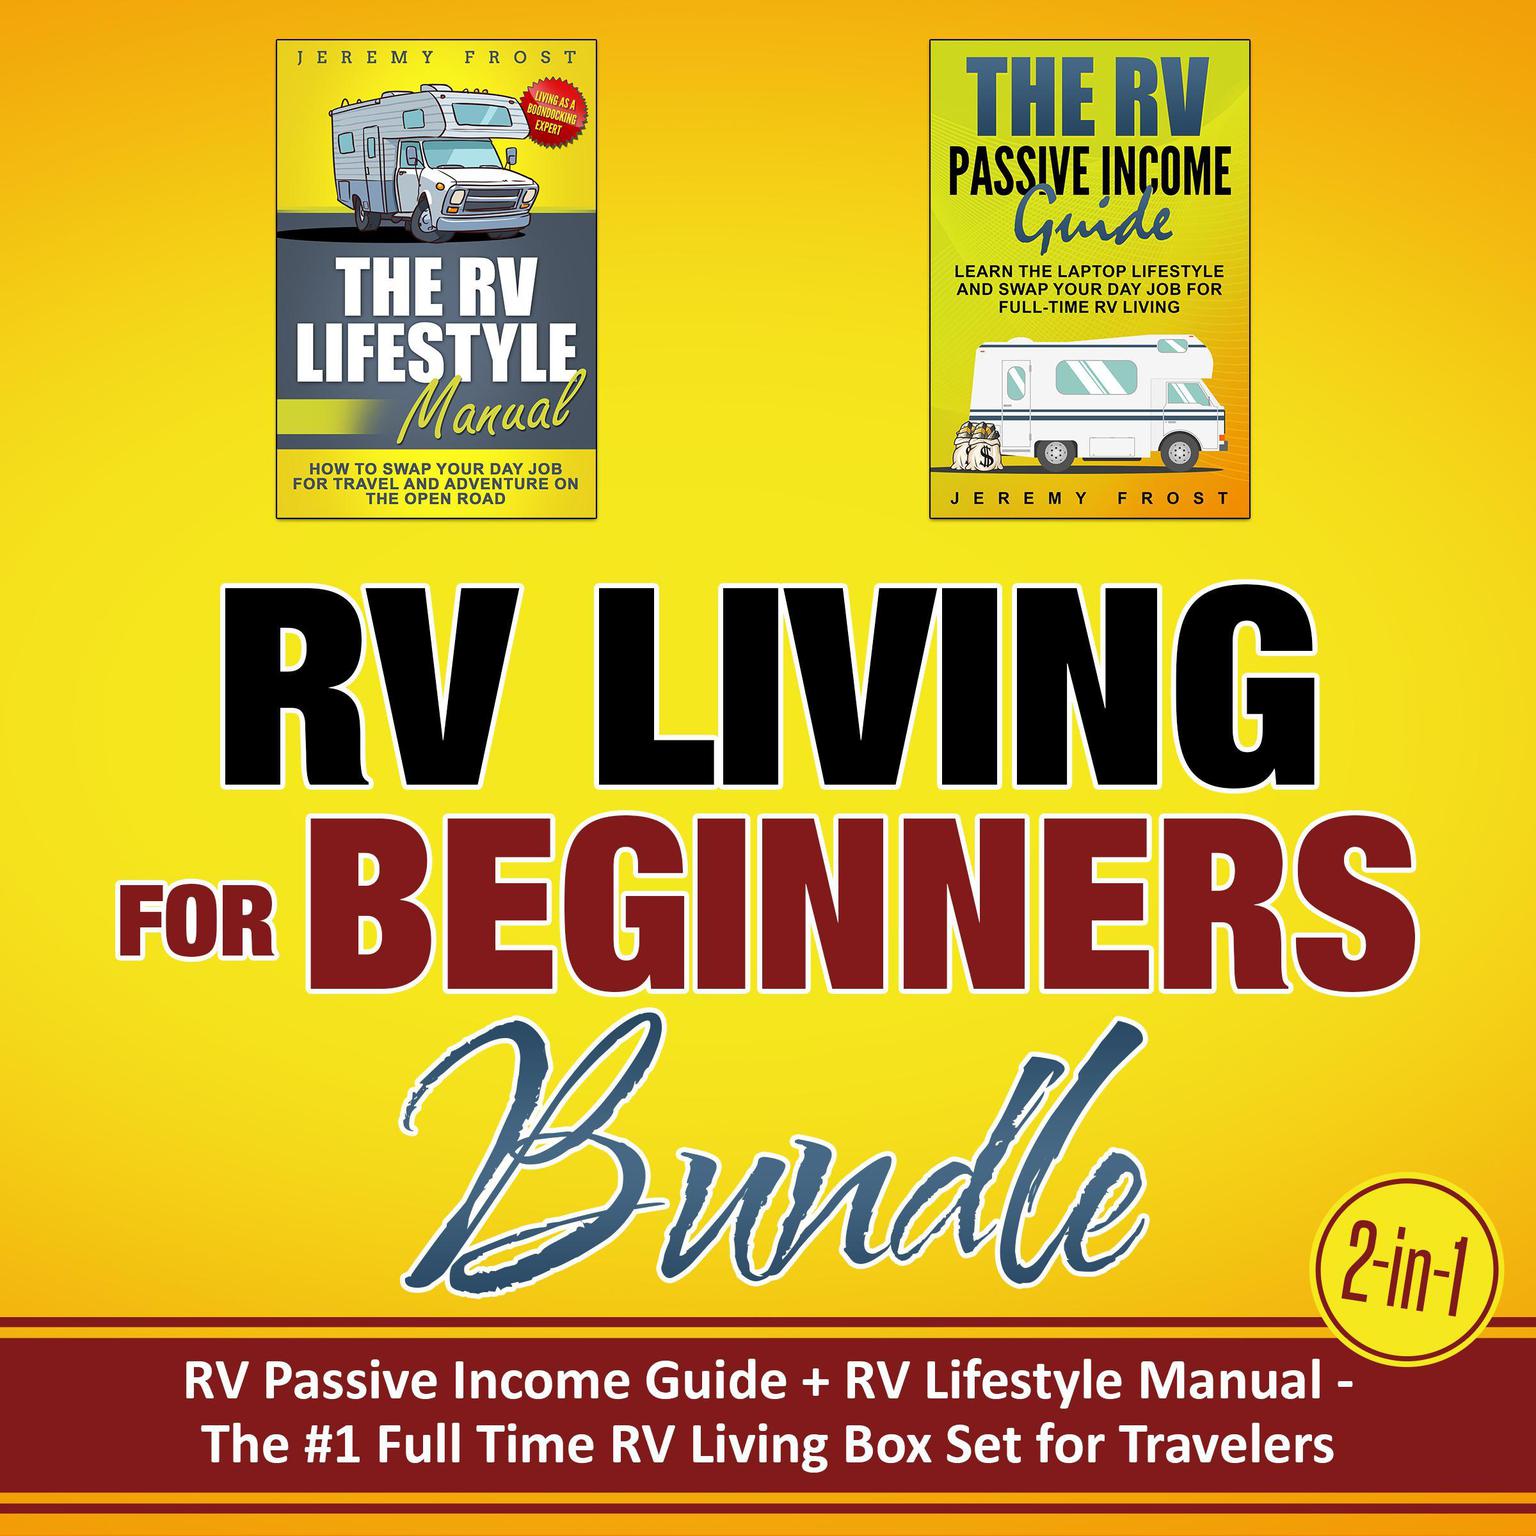 RV Living for Beginners Bundle (2-in-1): RV Passive Income Guide + RV Lifestyle Manual - The #1 Full-Time RV Living Box Set for Travelers: RV Passive Income Guide + RV Lifestyle Manual Audiobook, by Jeremy Frost